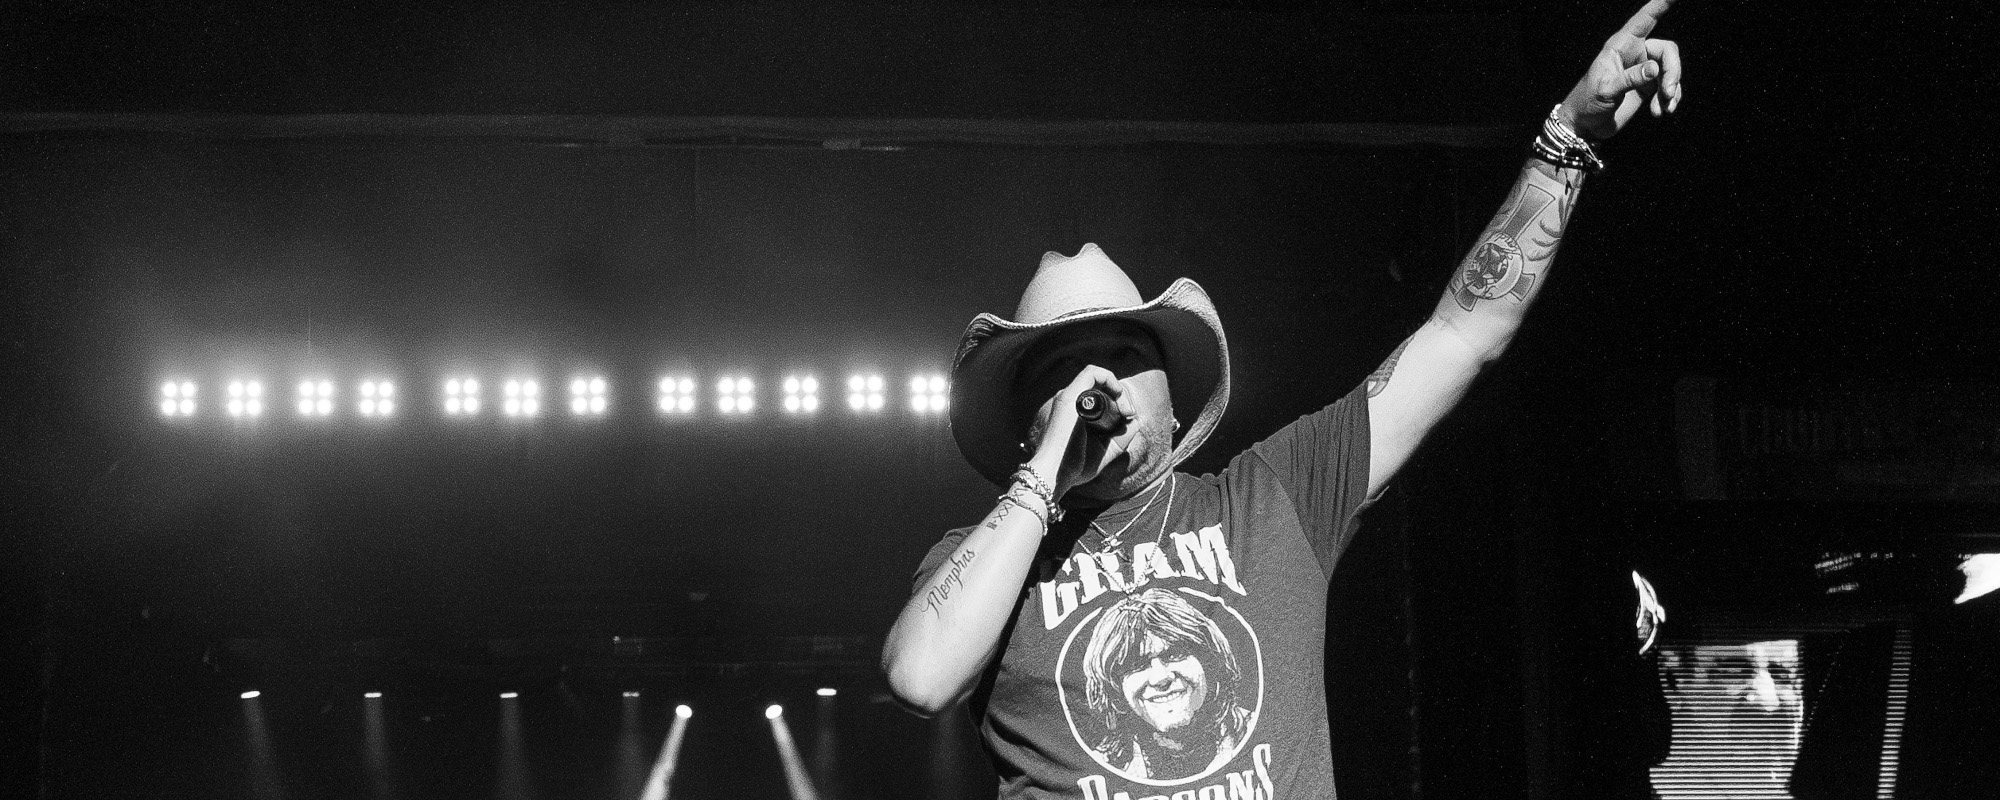 Jason Aldean’s “Try That In A Small Town” Experiences Big Drop on Billboard’s Hot 100